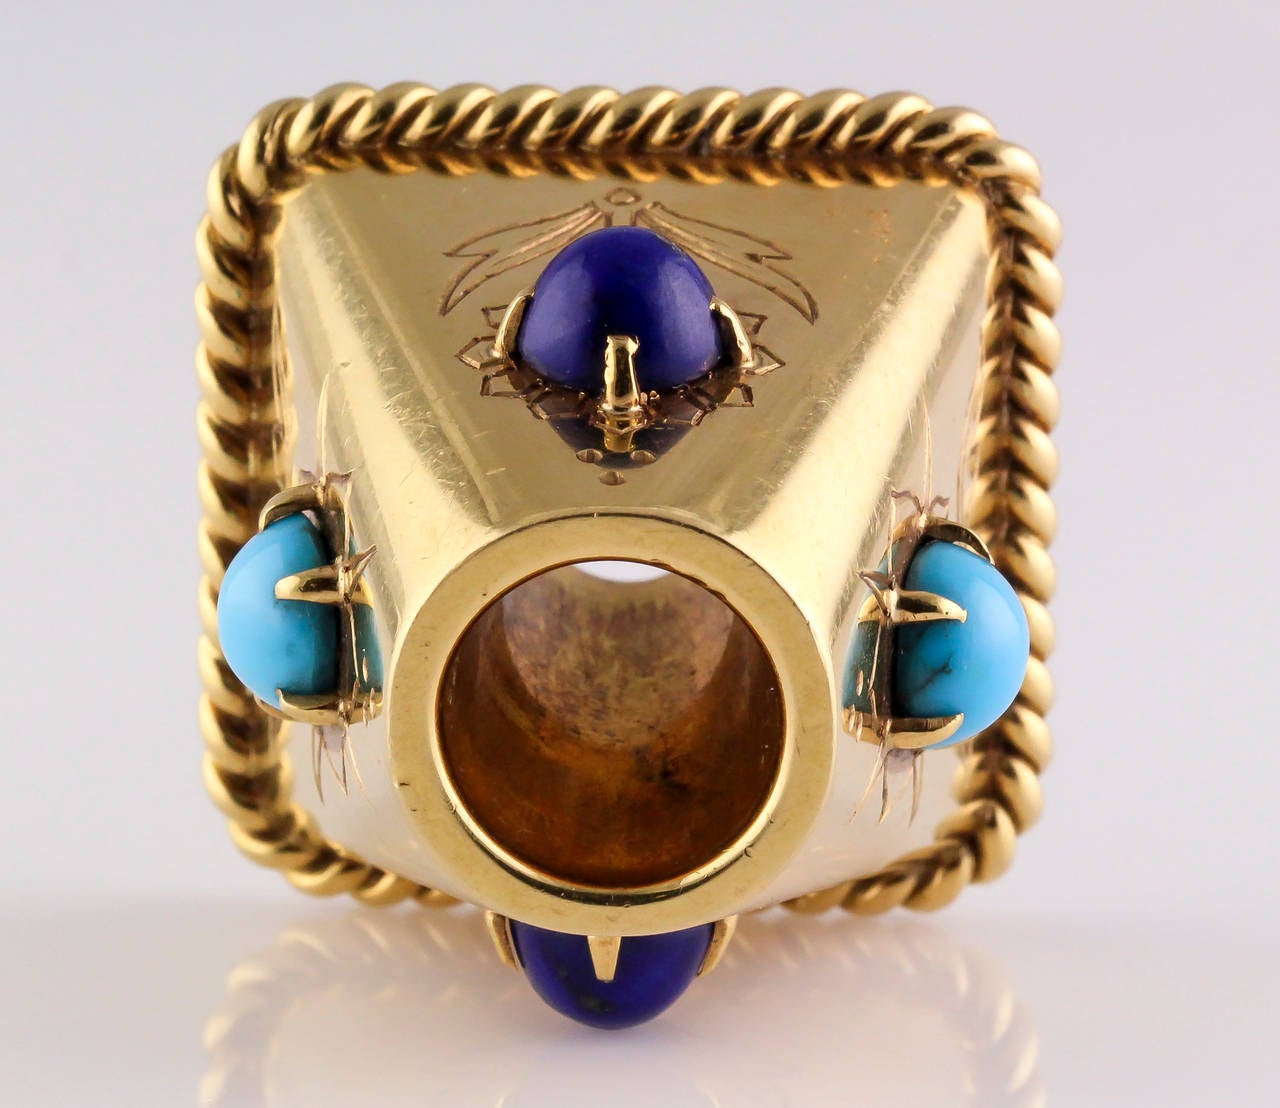 Rare and unusual turquoise, lapis and 18K yellow gold pen holder by Cartier London, circa 1940s. It features blue cabochon lapis stones on opposing ends, and light blue turquoise at other ends. Base has an eye catching twisted rope gold accent, and